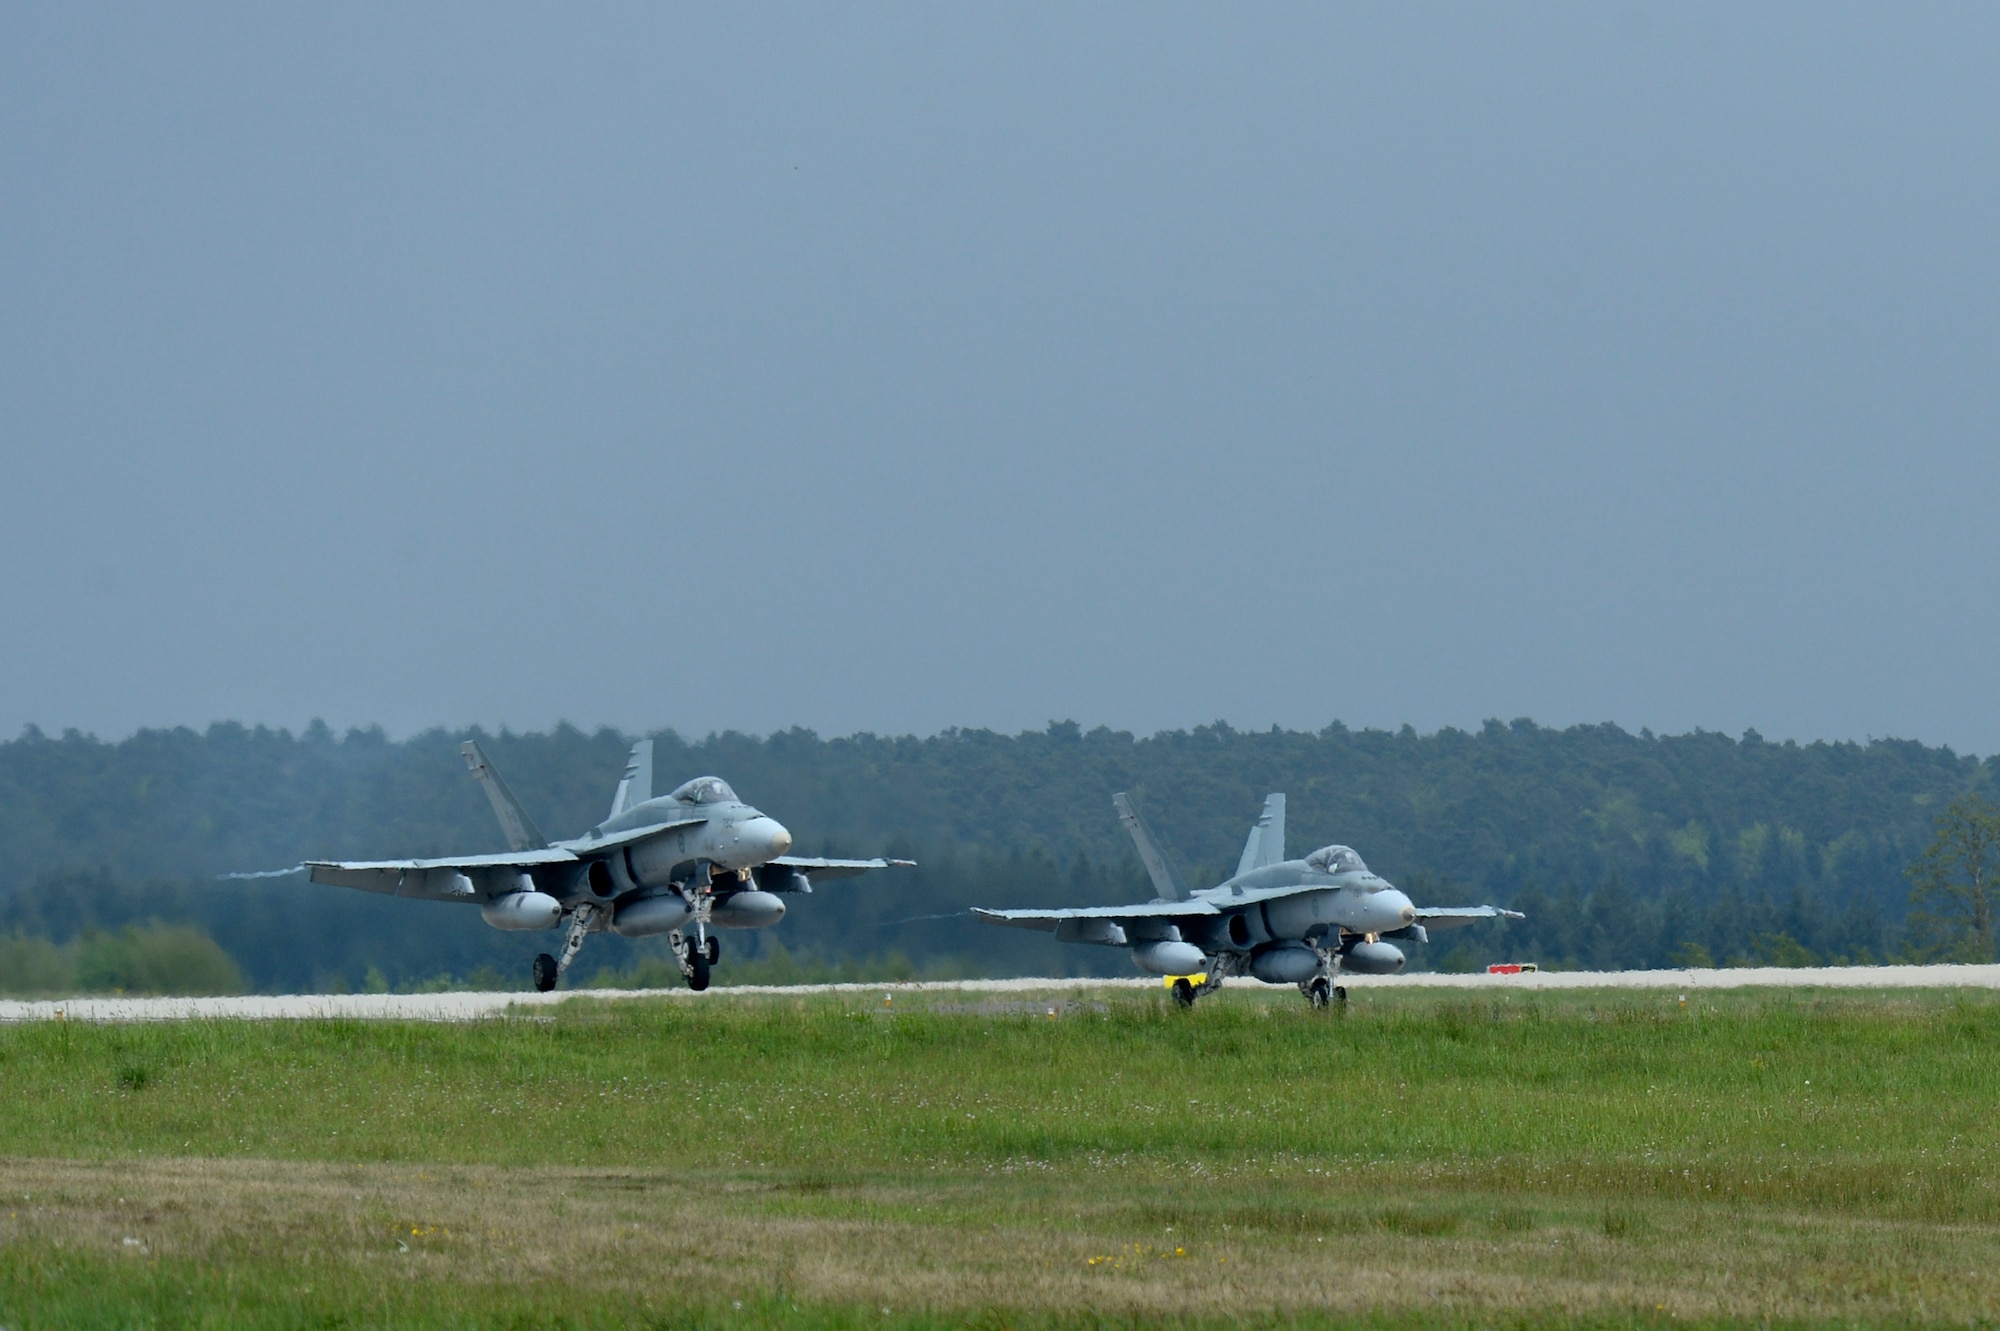 Royal Canadian Air Force pilots land CF-18 Hornet fighter aircraft on the flightline May 1, 2014, at Spangdahlem Air Base, Germany. The fighter aircraft, along with support personnel, are travelling to Romania in order to conduct training activities as part of NATO reassurance measures to Central and Eastern Europe. The 52nd Fighter Wing and 726th Air Mobility Squadron at Spangdahlem are forward-based, with ready forces equipped to further enable NATO operations and enhance partner readiness. (U.S. Air Force photo by Senior Airman Rusty Frank/Released)